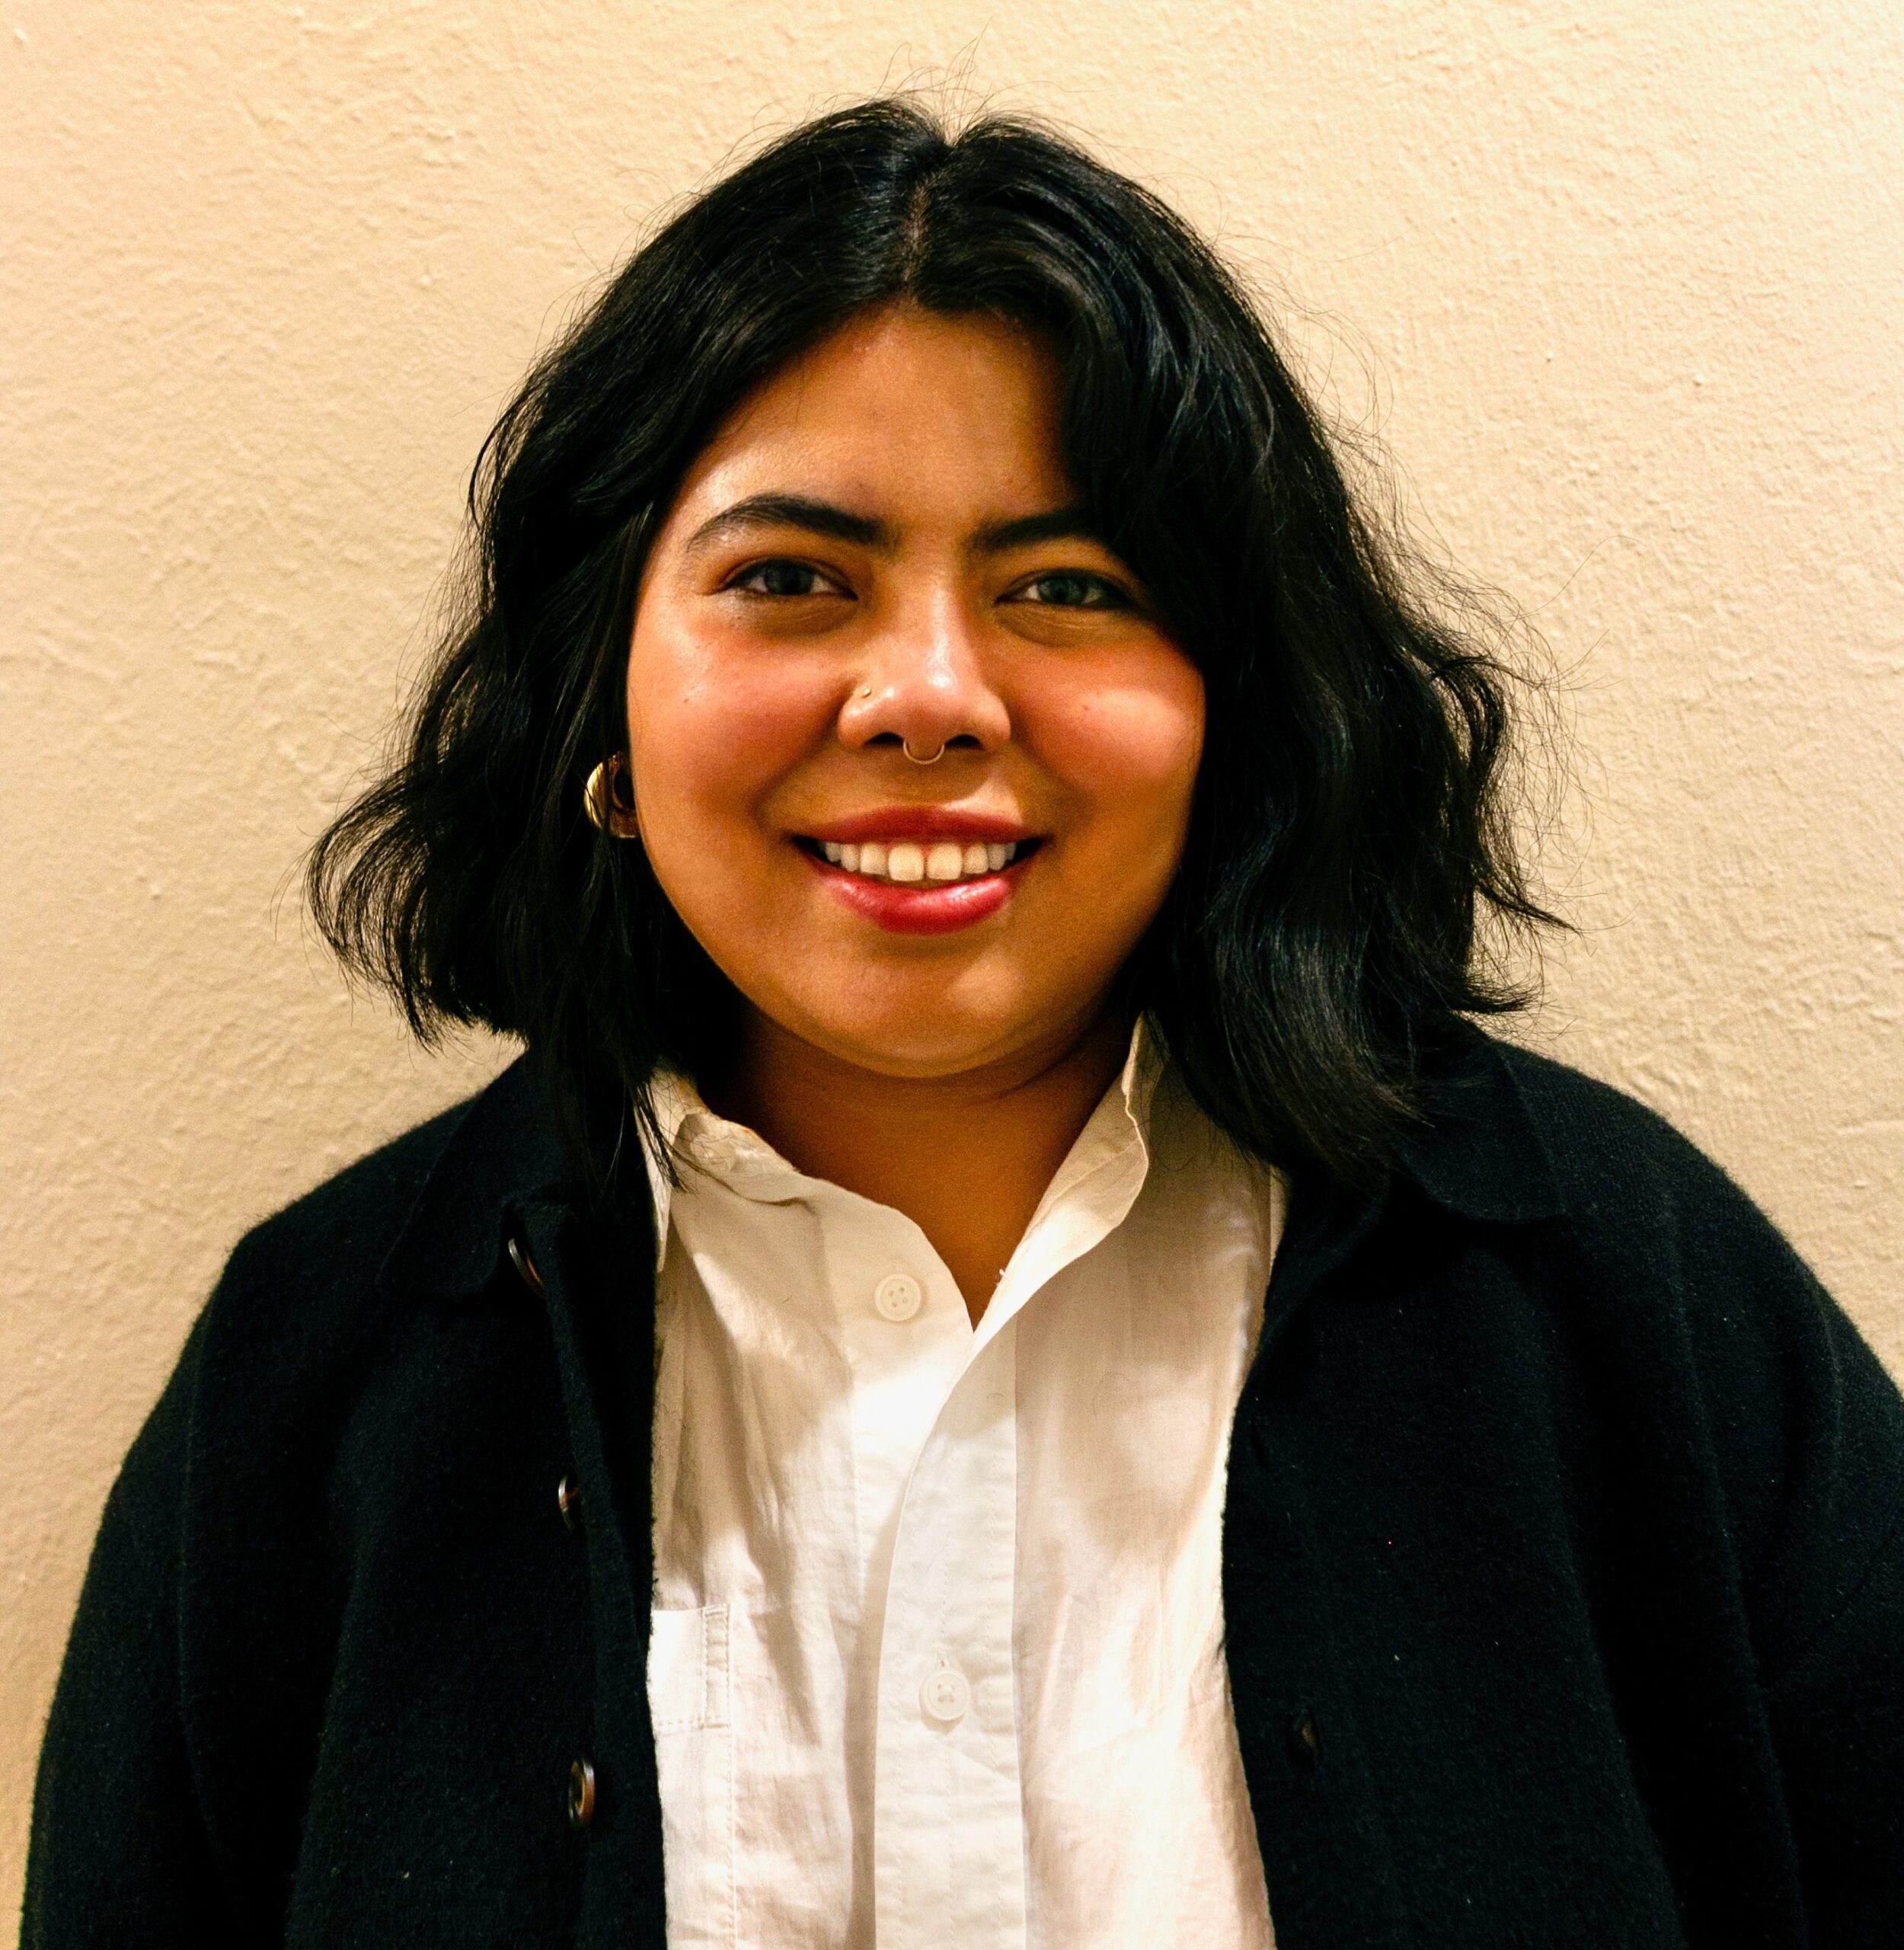 young Latina woman smiling wearing professional clothes